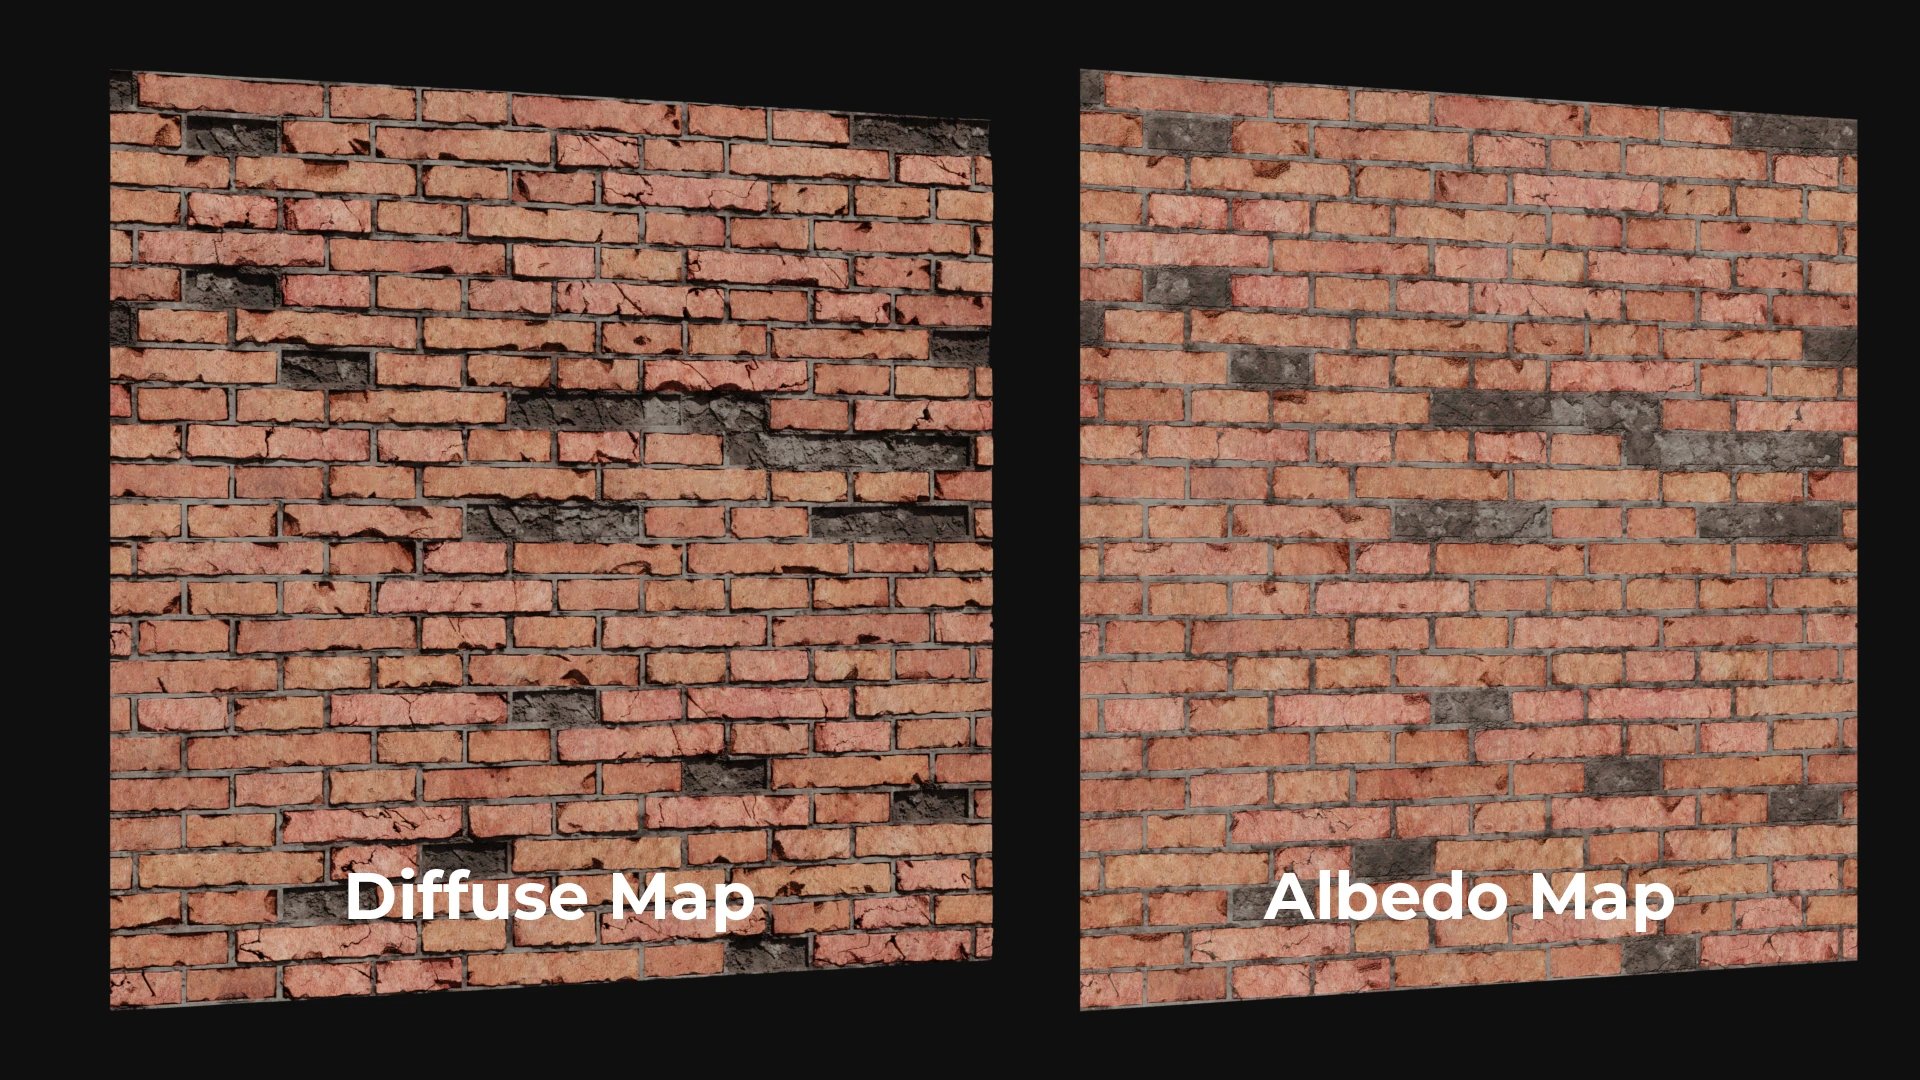 Difference between Albedo and Diffuse map